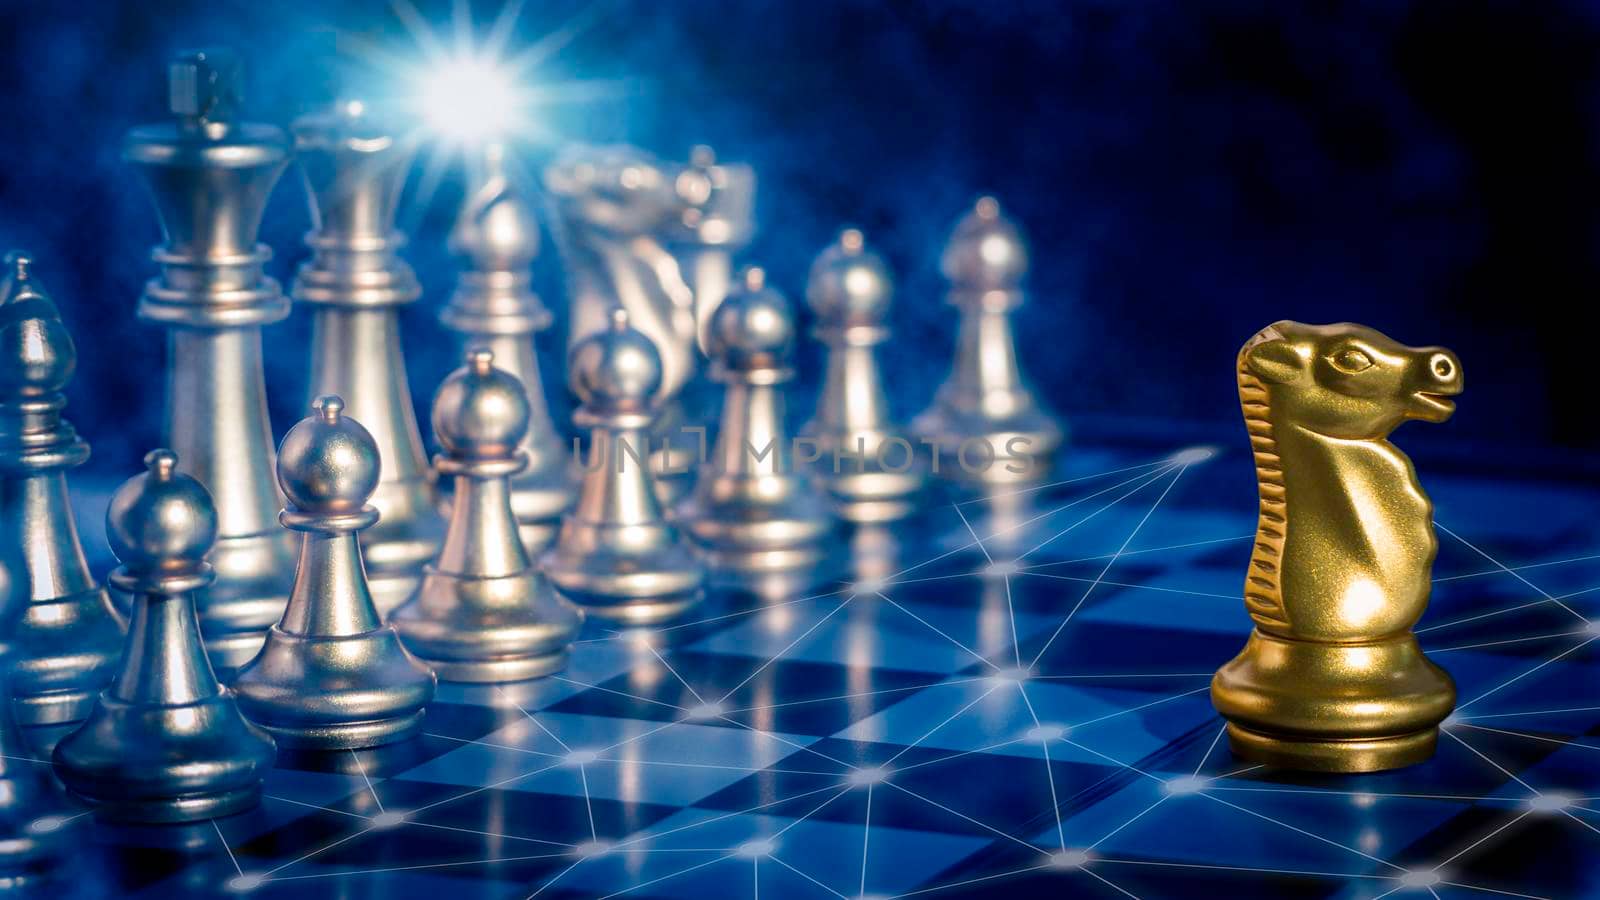 Golden knight chess is leadership in front off silver chess pieces on chess board with network and communication by Chakreeyarut